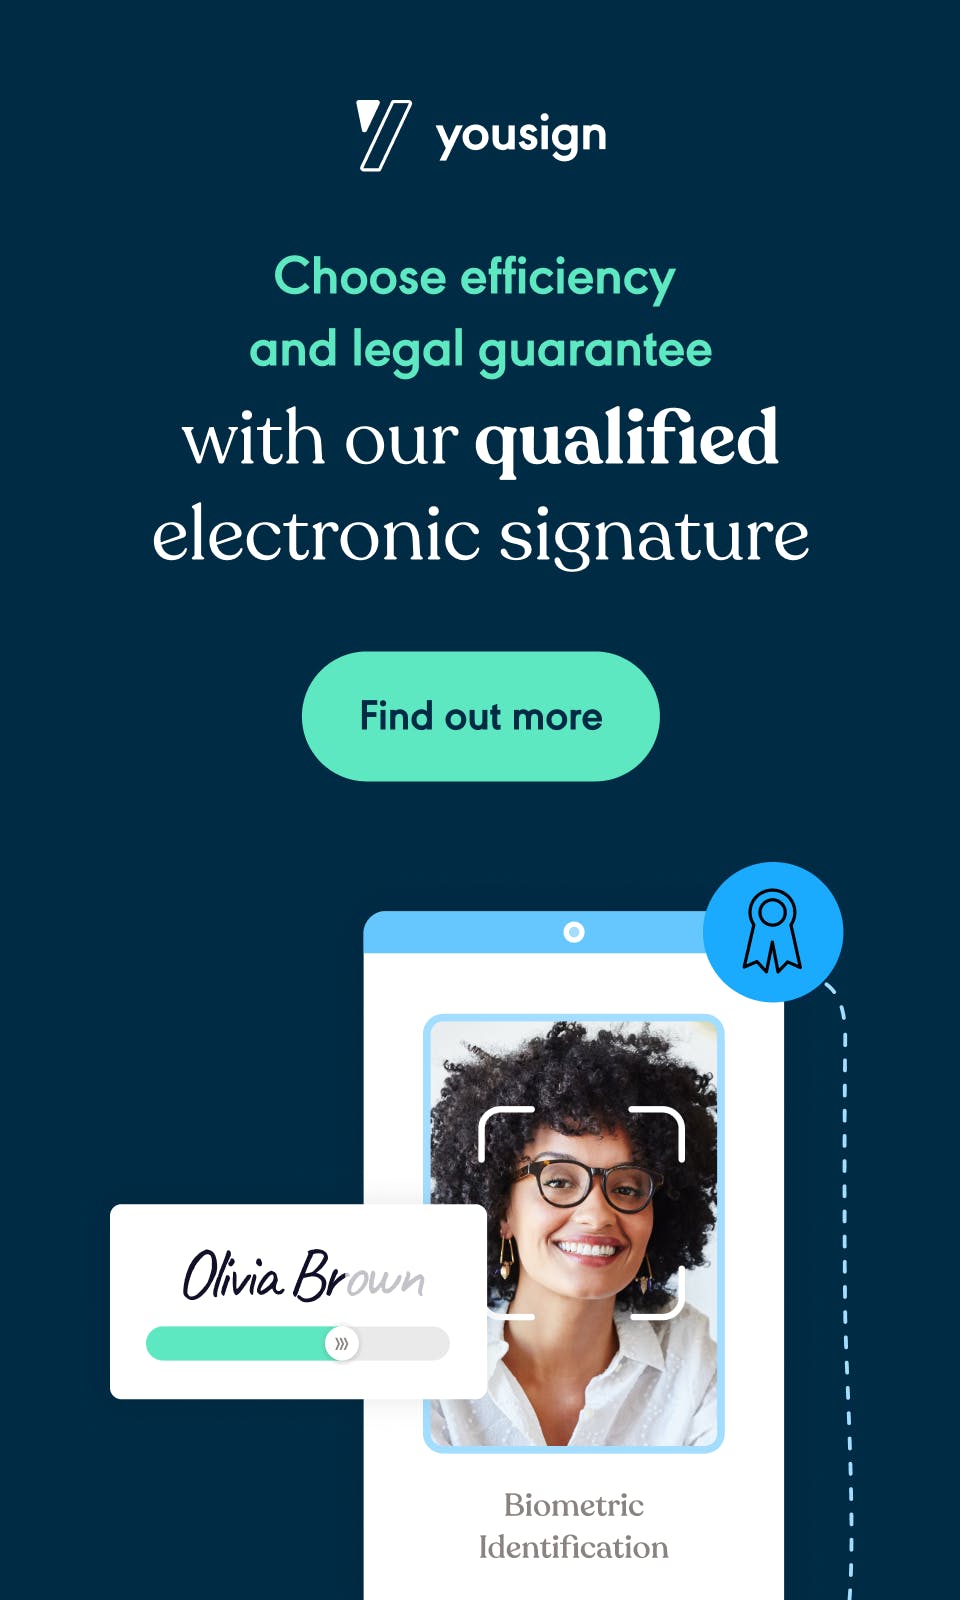 Find out more about qualified electronic signature